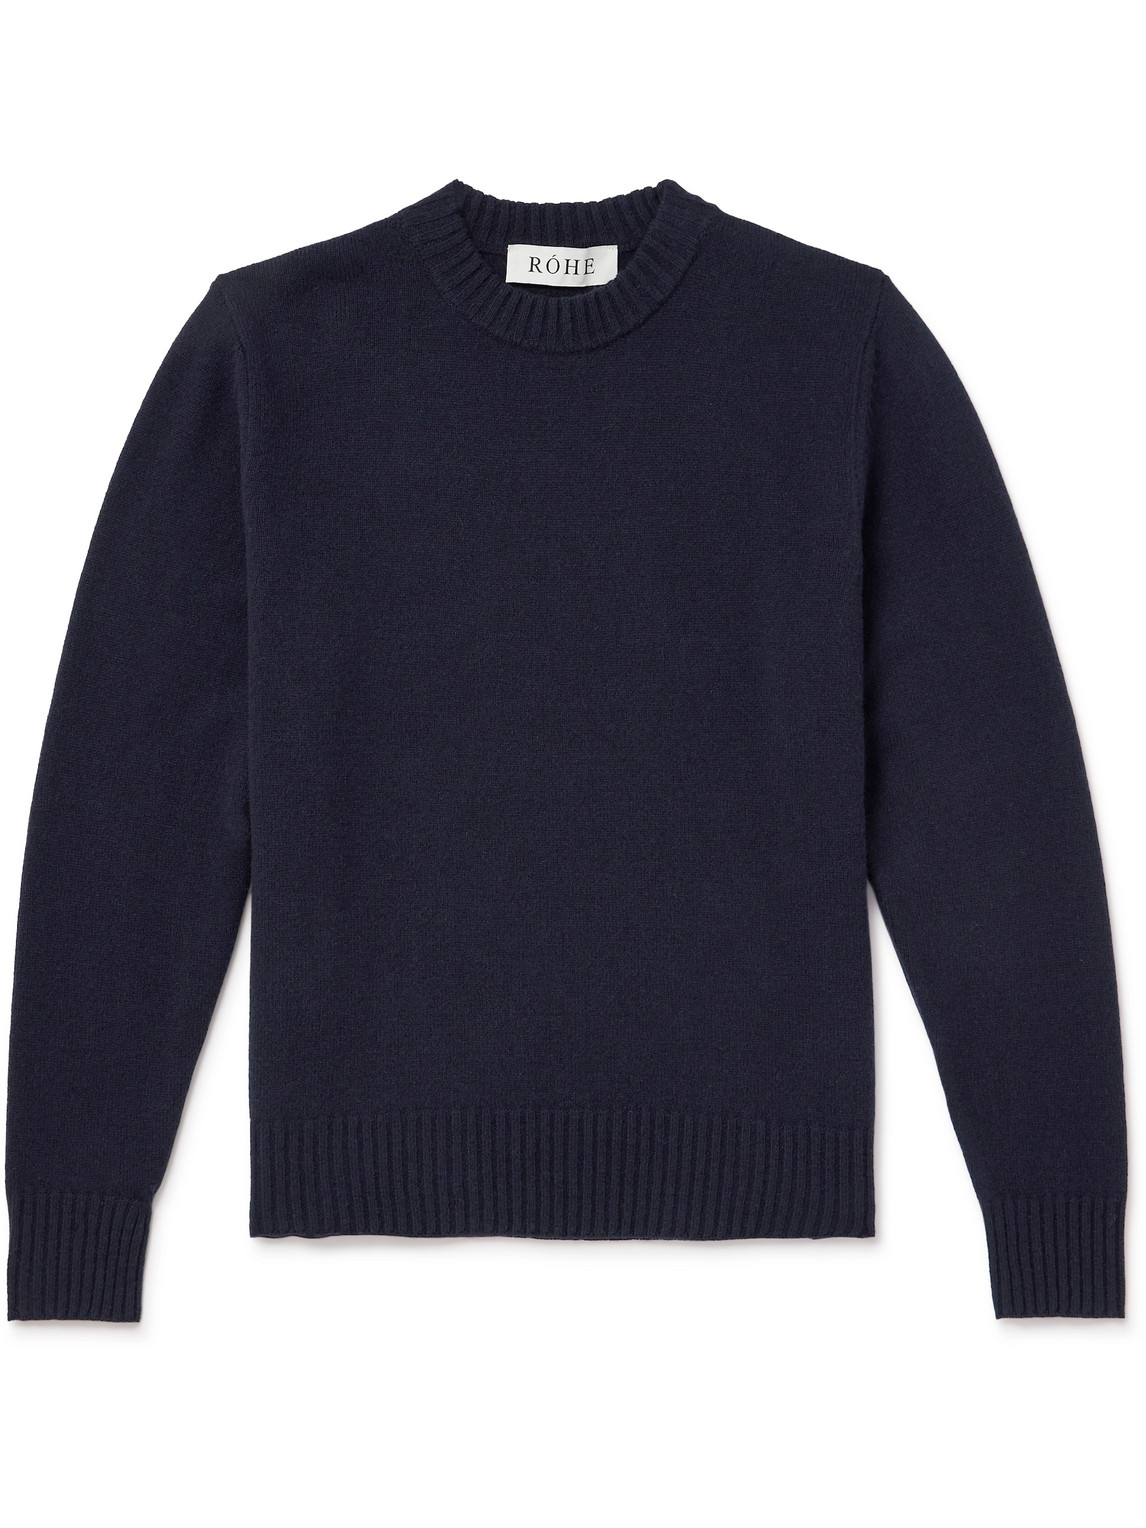 Rohe Wool And Cashmere-blend Jumper In Blue